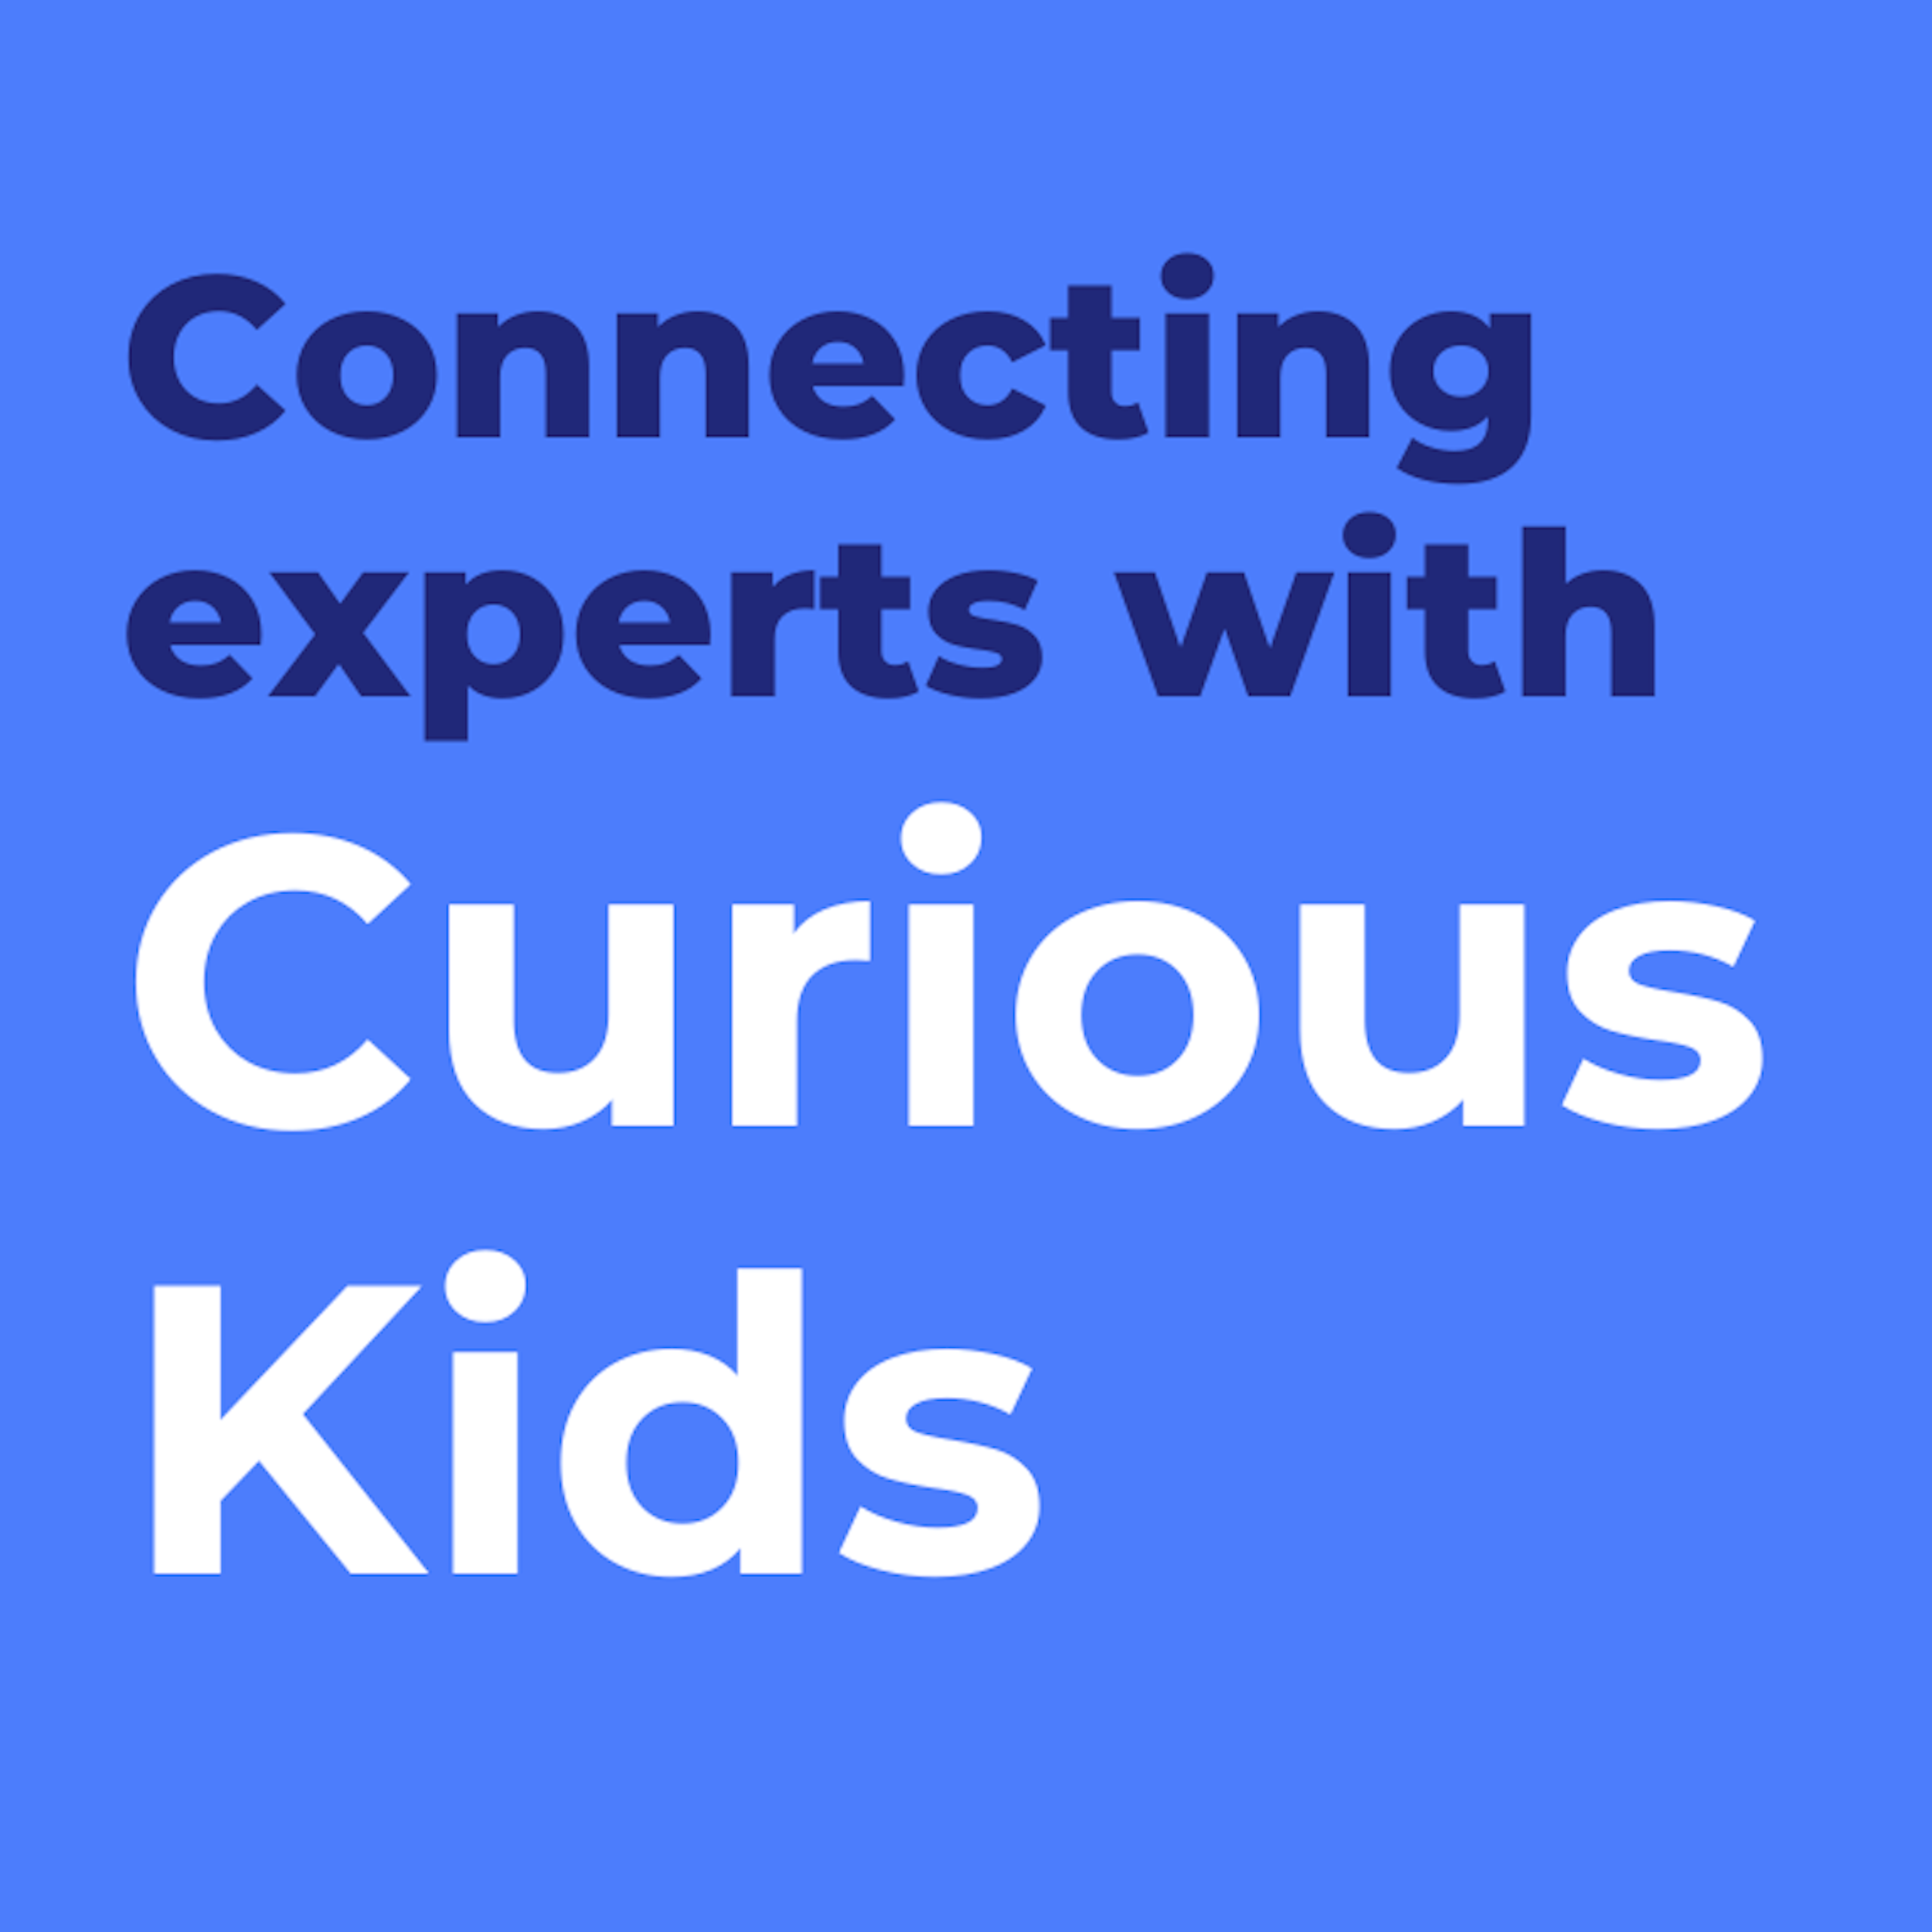 Graphic that says 'connecting experts with curious kids', with words in background saying 'how? why? who?'